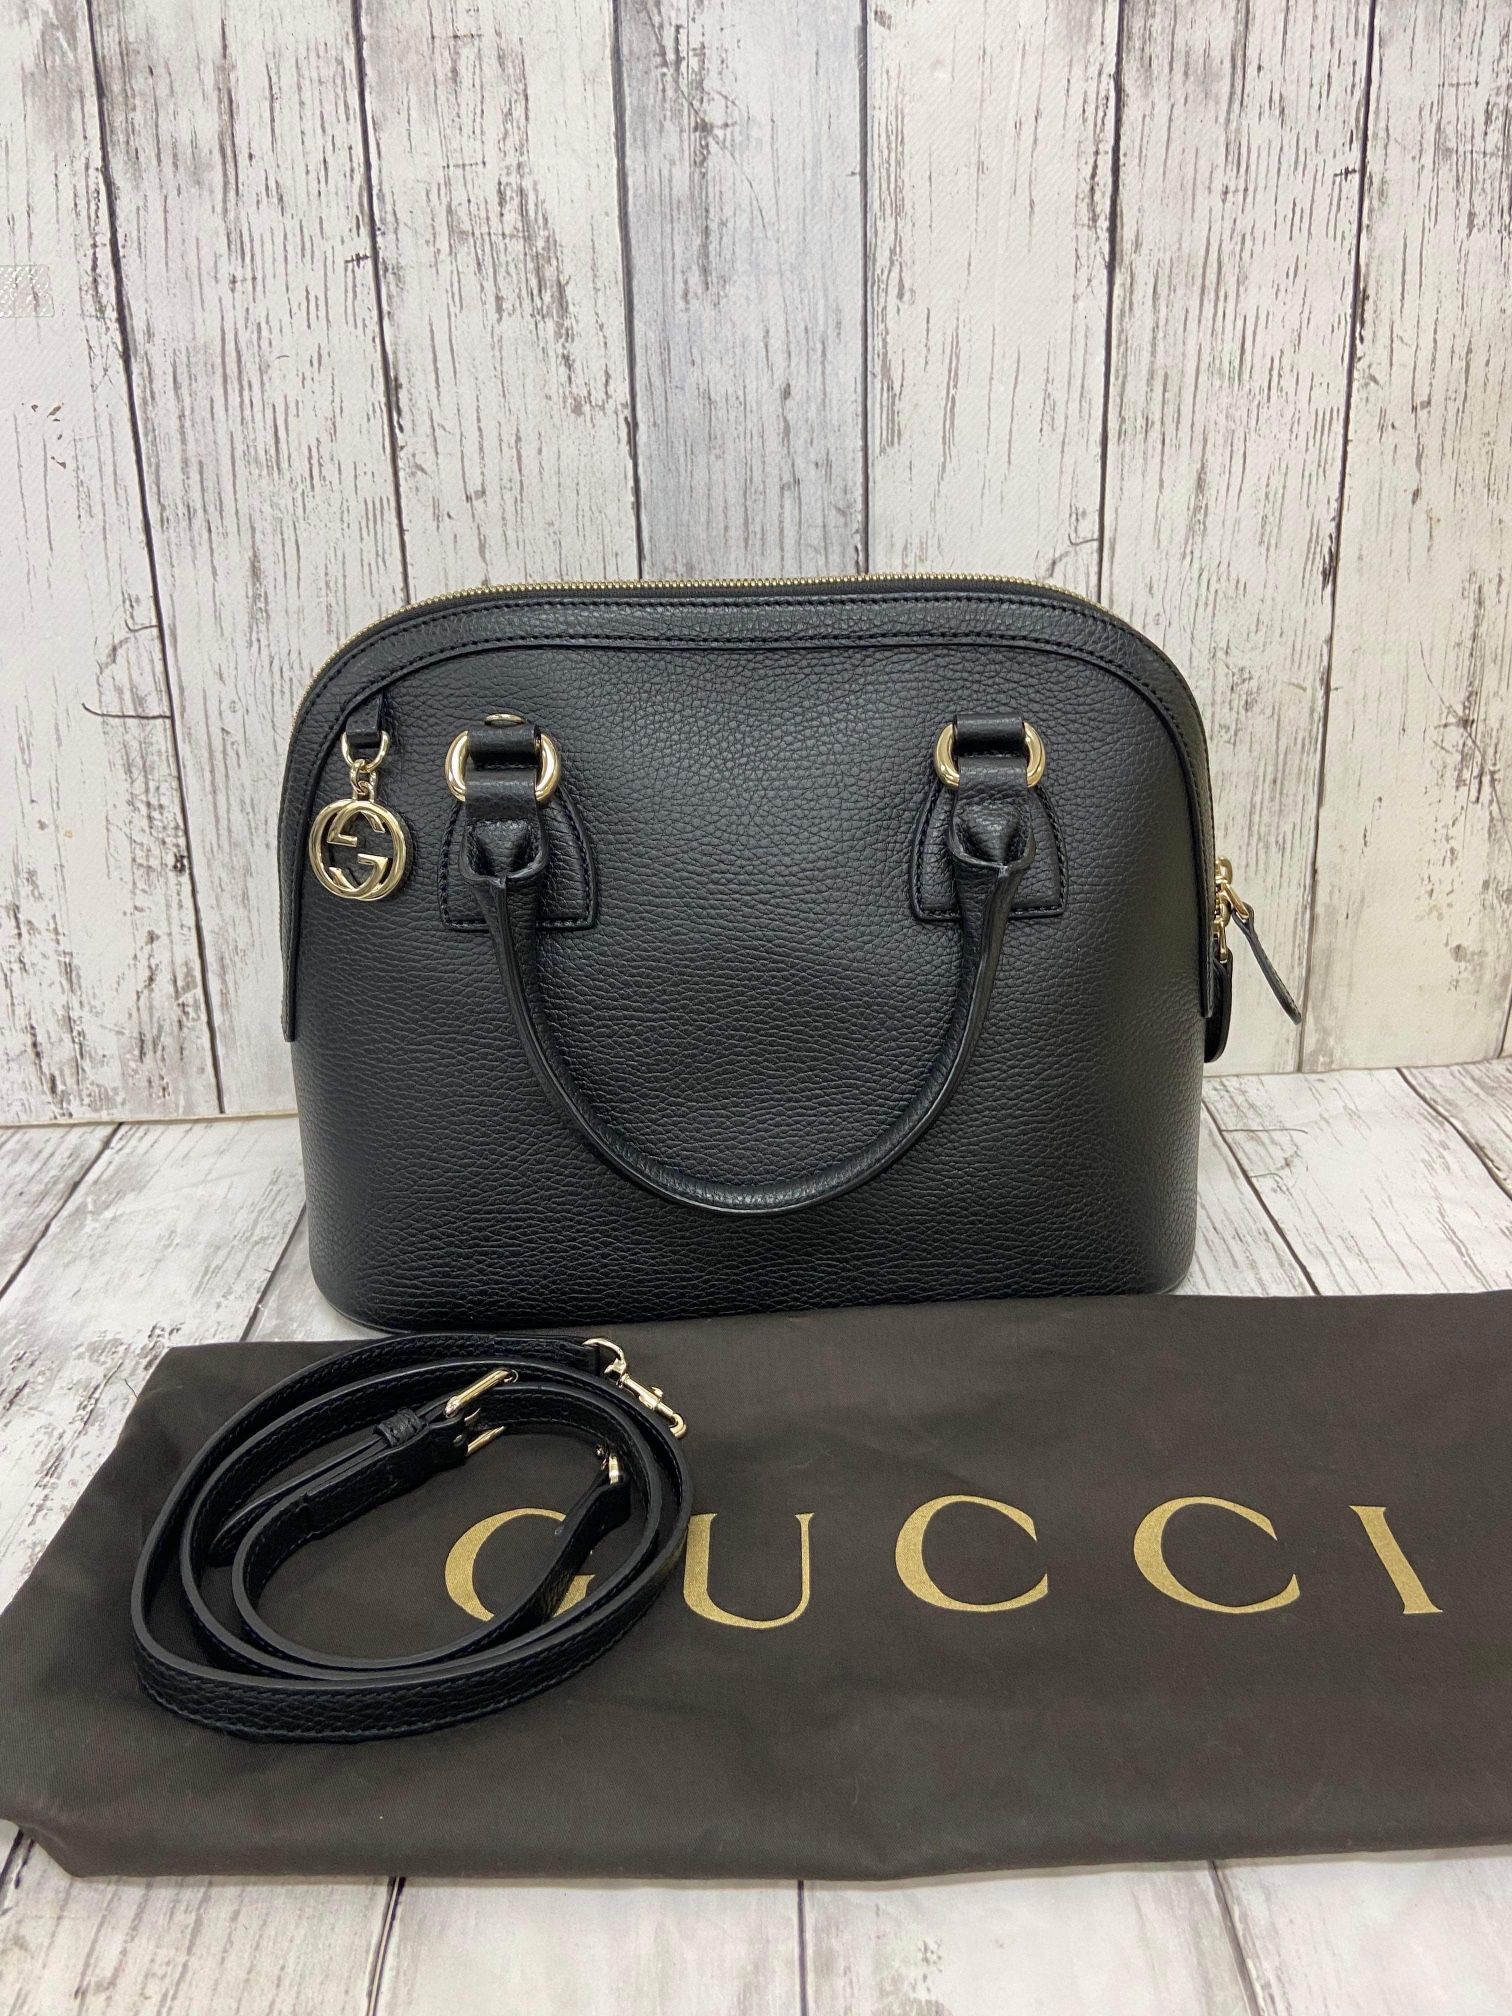 Authentic Gucci Dome Two-way Crossbody Bag